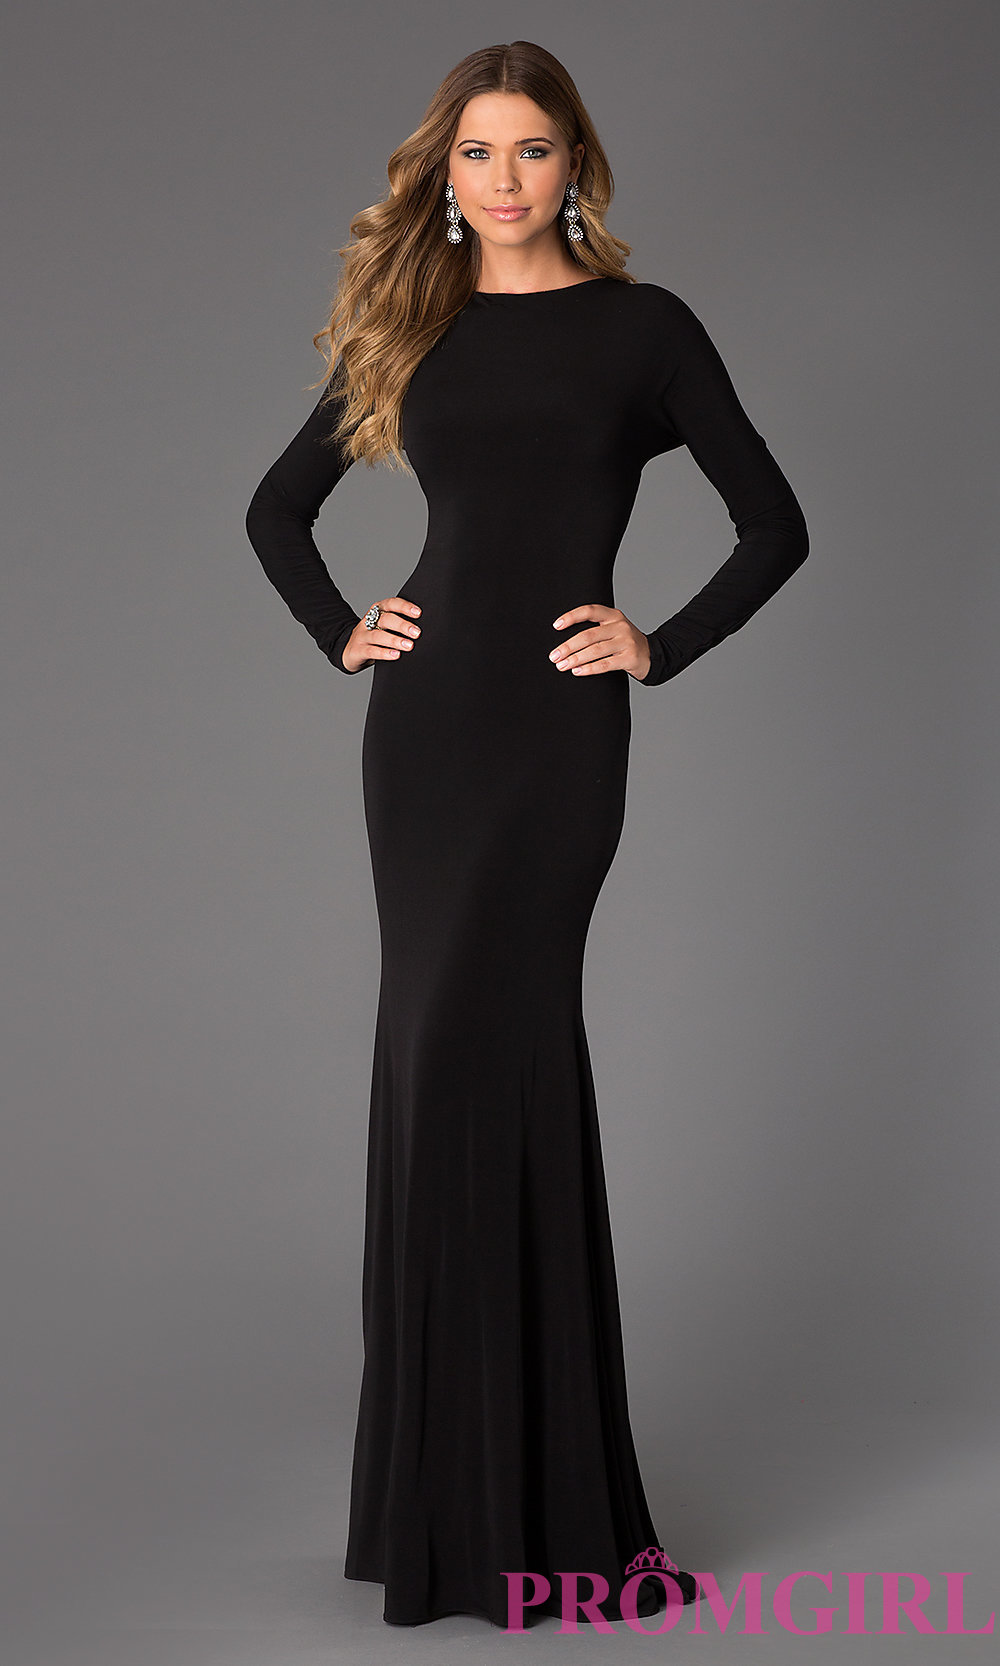 Long Sleeved Full Length Evening Dresses & Always In Fashion For All Occasions